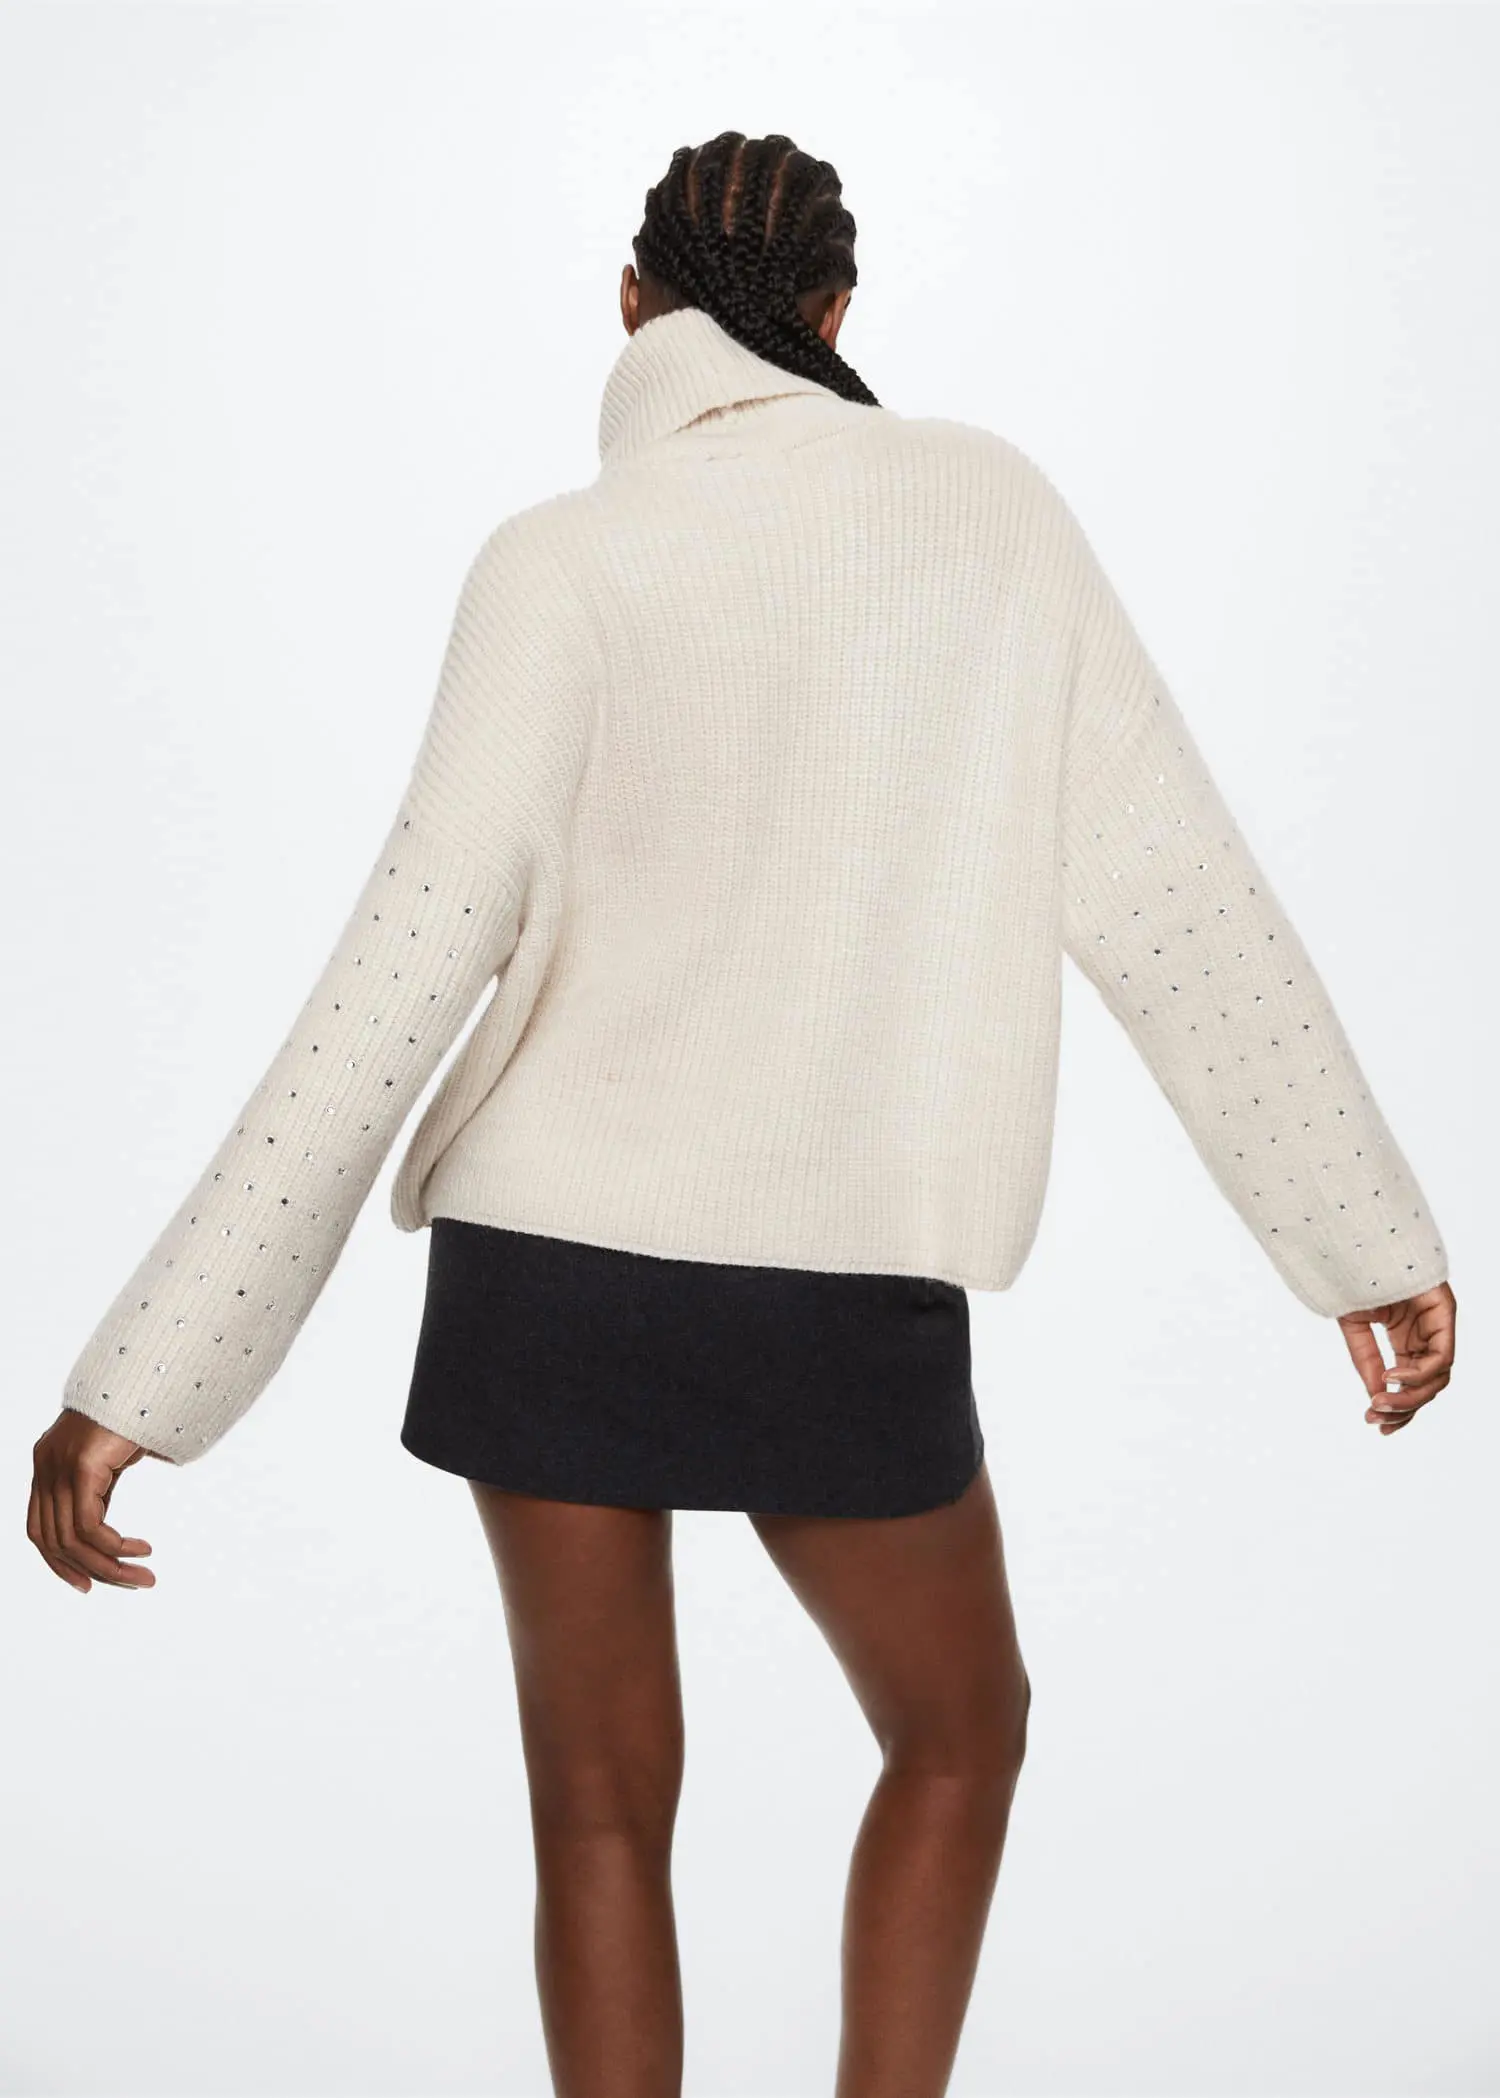 Mango Crystal detail sweatshirt. a woman wearing a white sweater and a black skirt. 